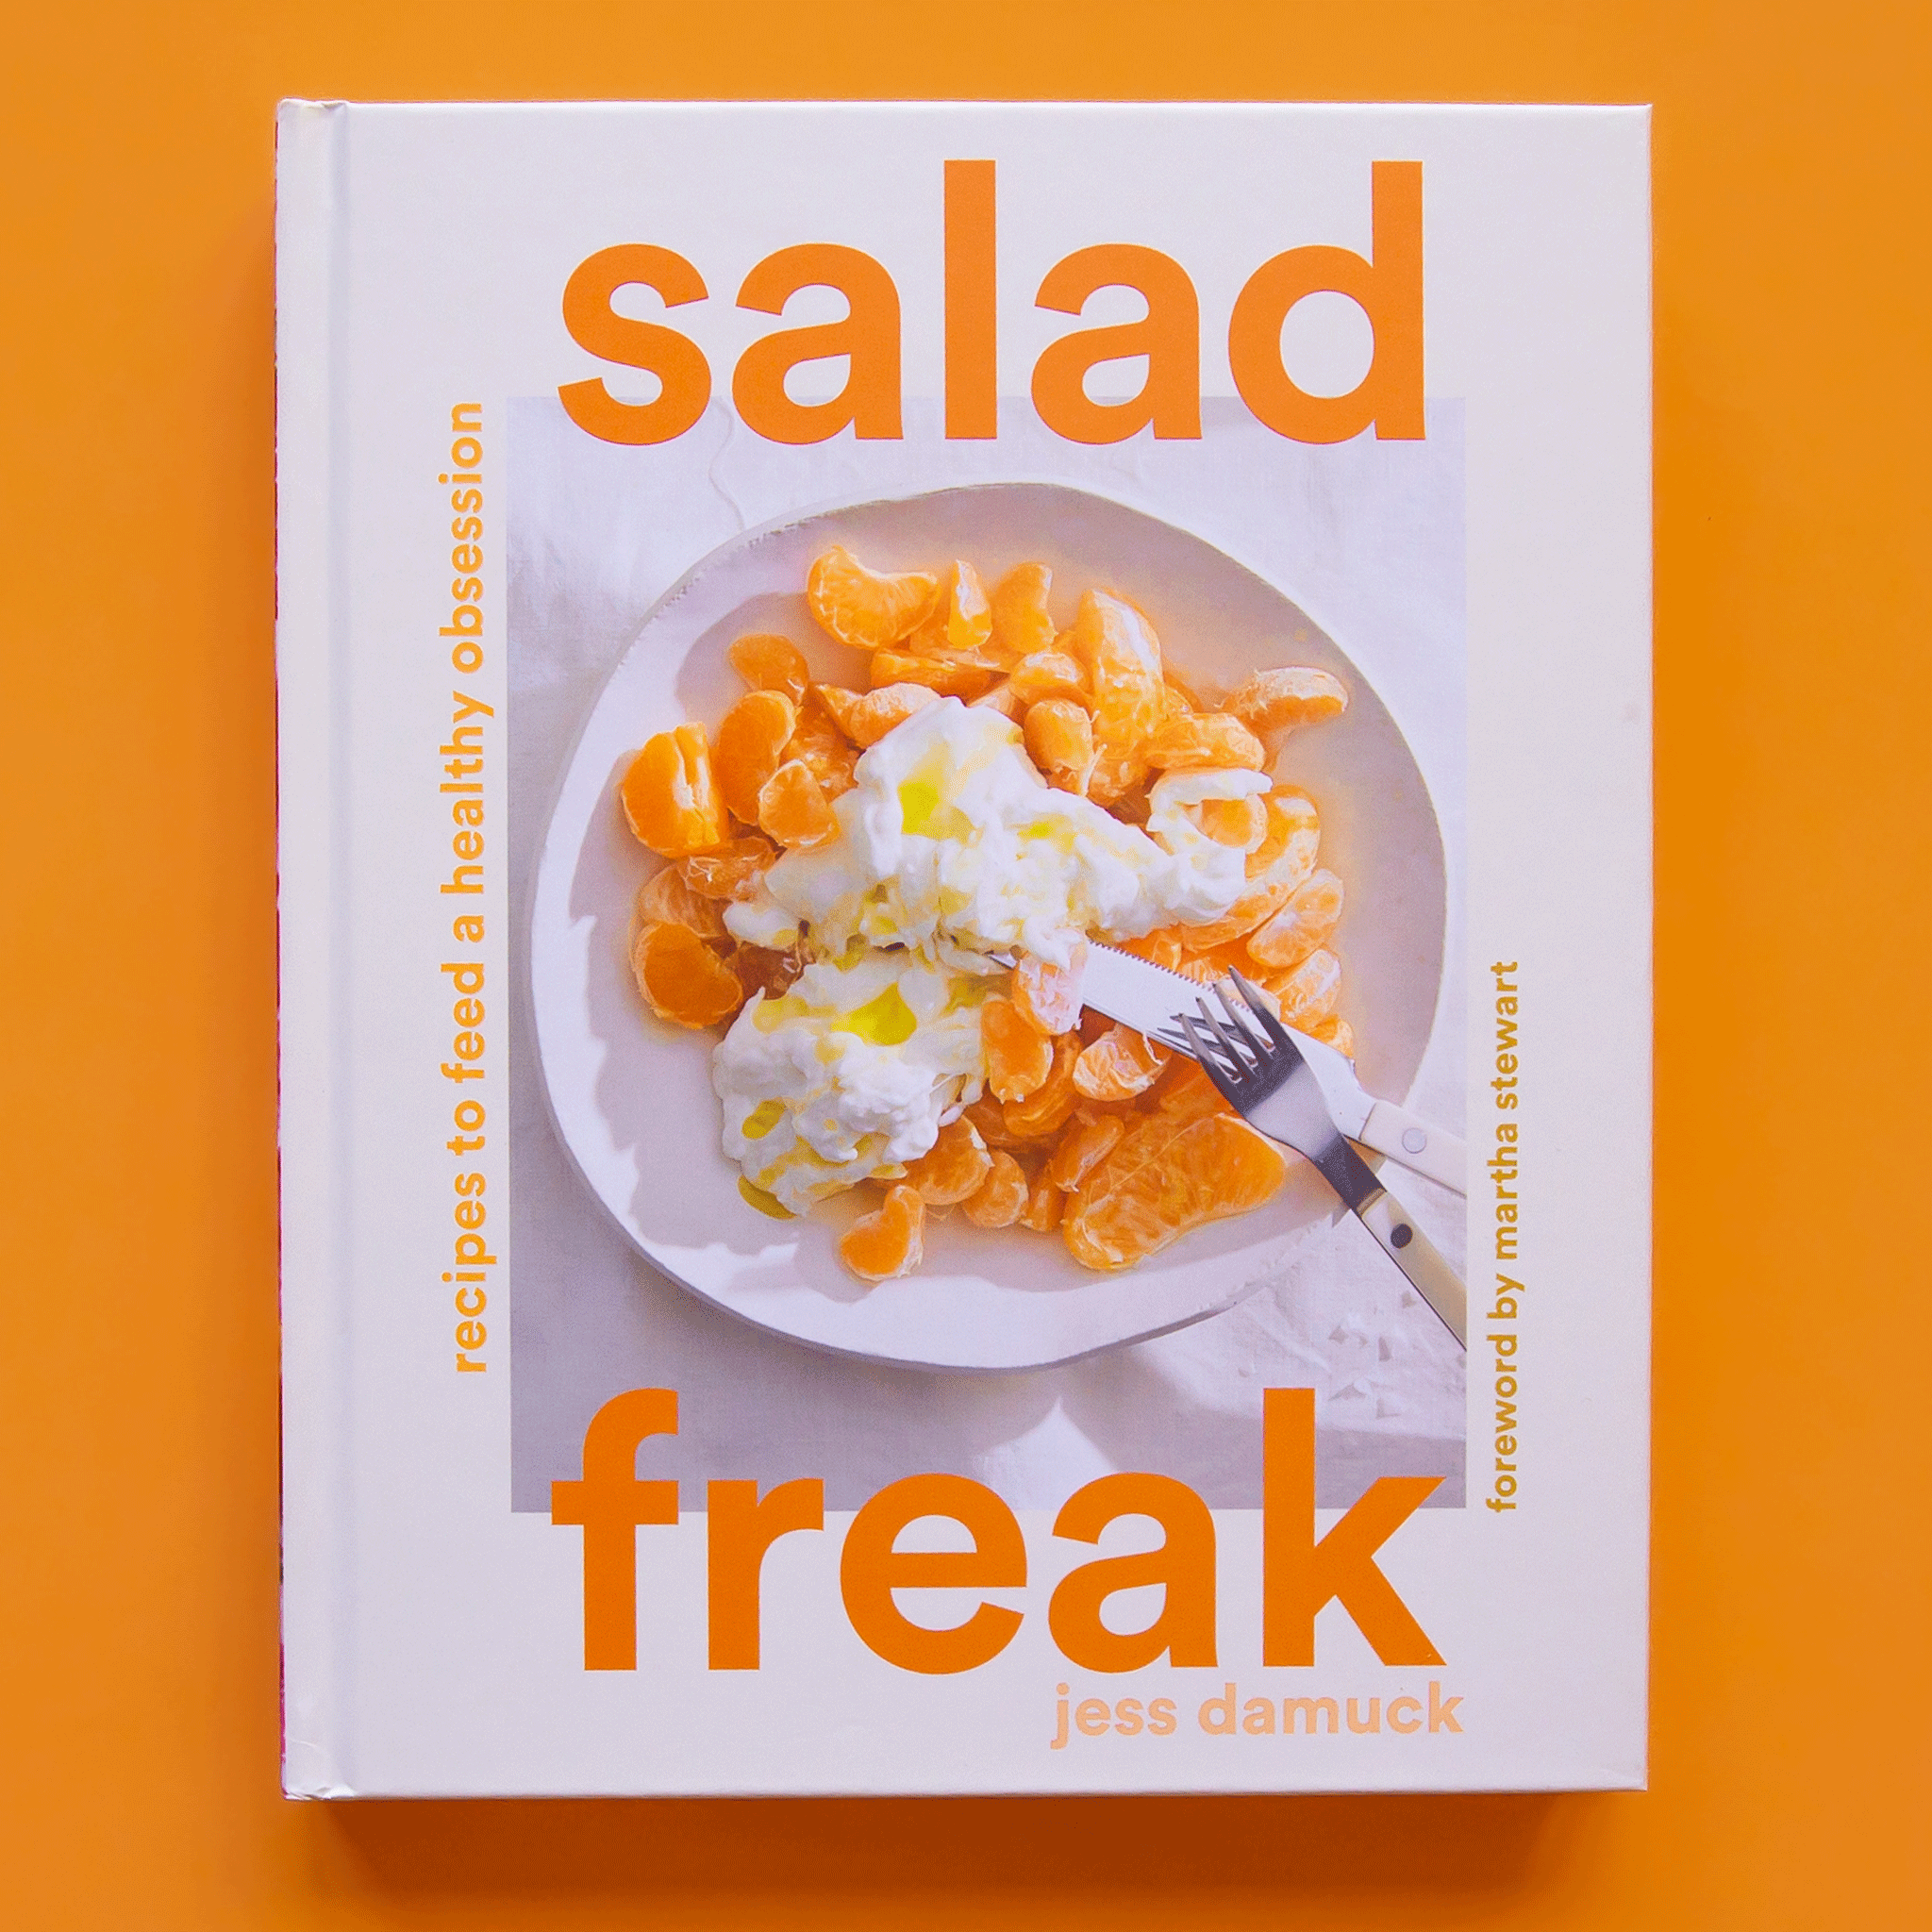 A white cookbook that has a bright orange text reading, "Salad Freak, Recipies to feed a healthy obsession". The cover also has a photo of a vibrant Clemintine orange salad.